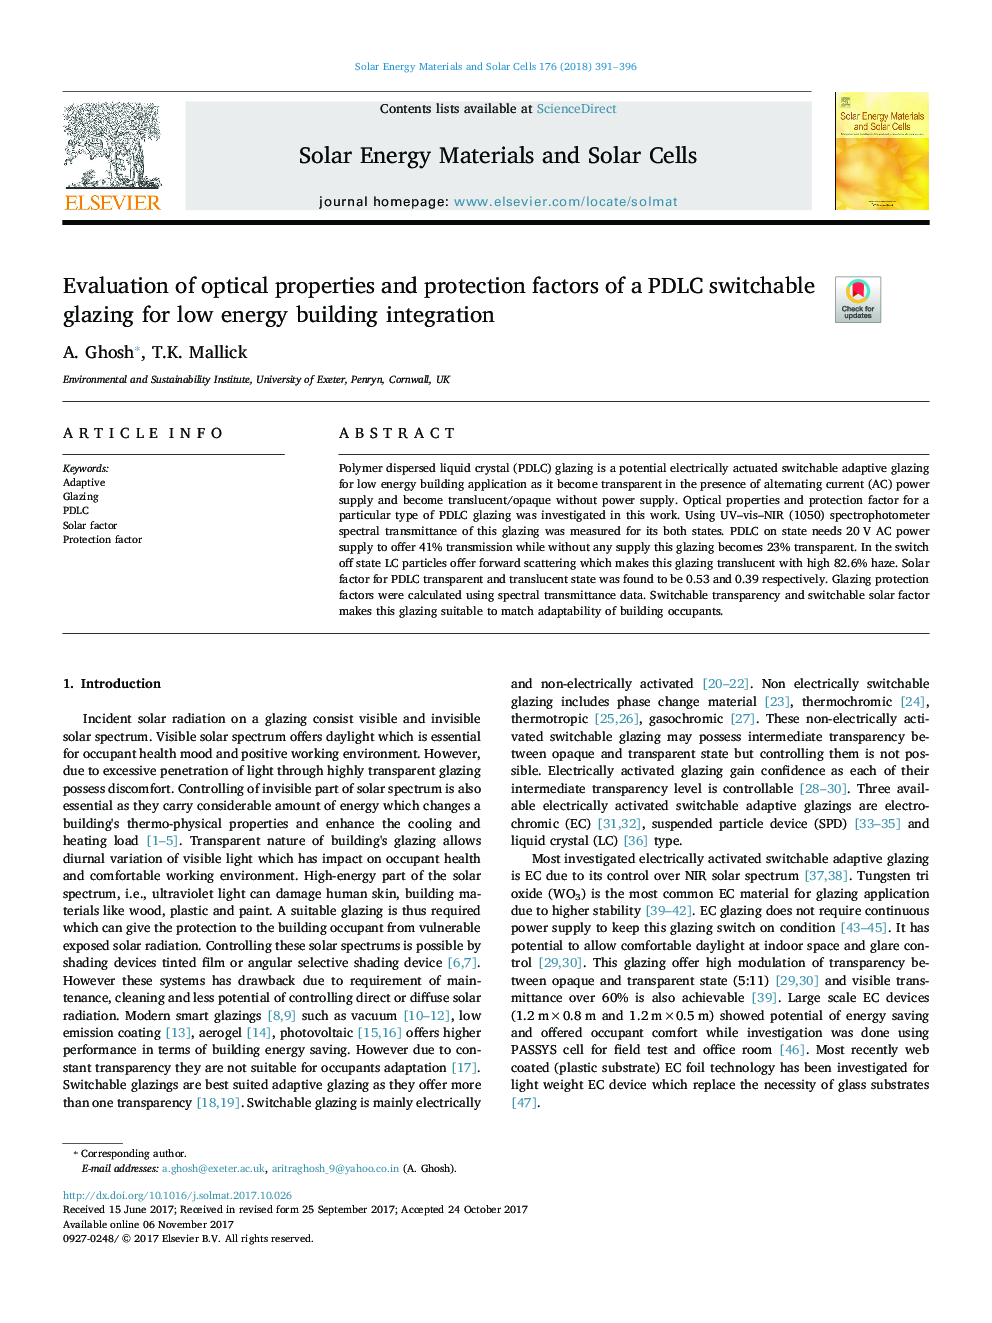 Evaluation of optical properties and protection factors of a PDLC switchable glazing for low energy building integration